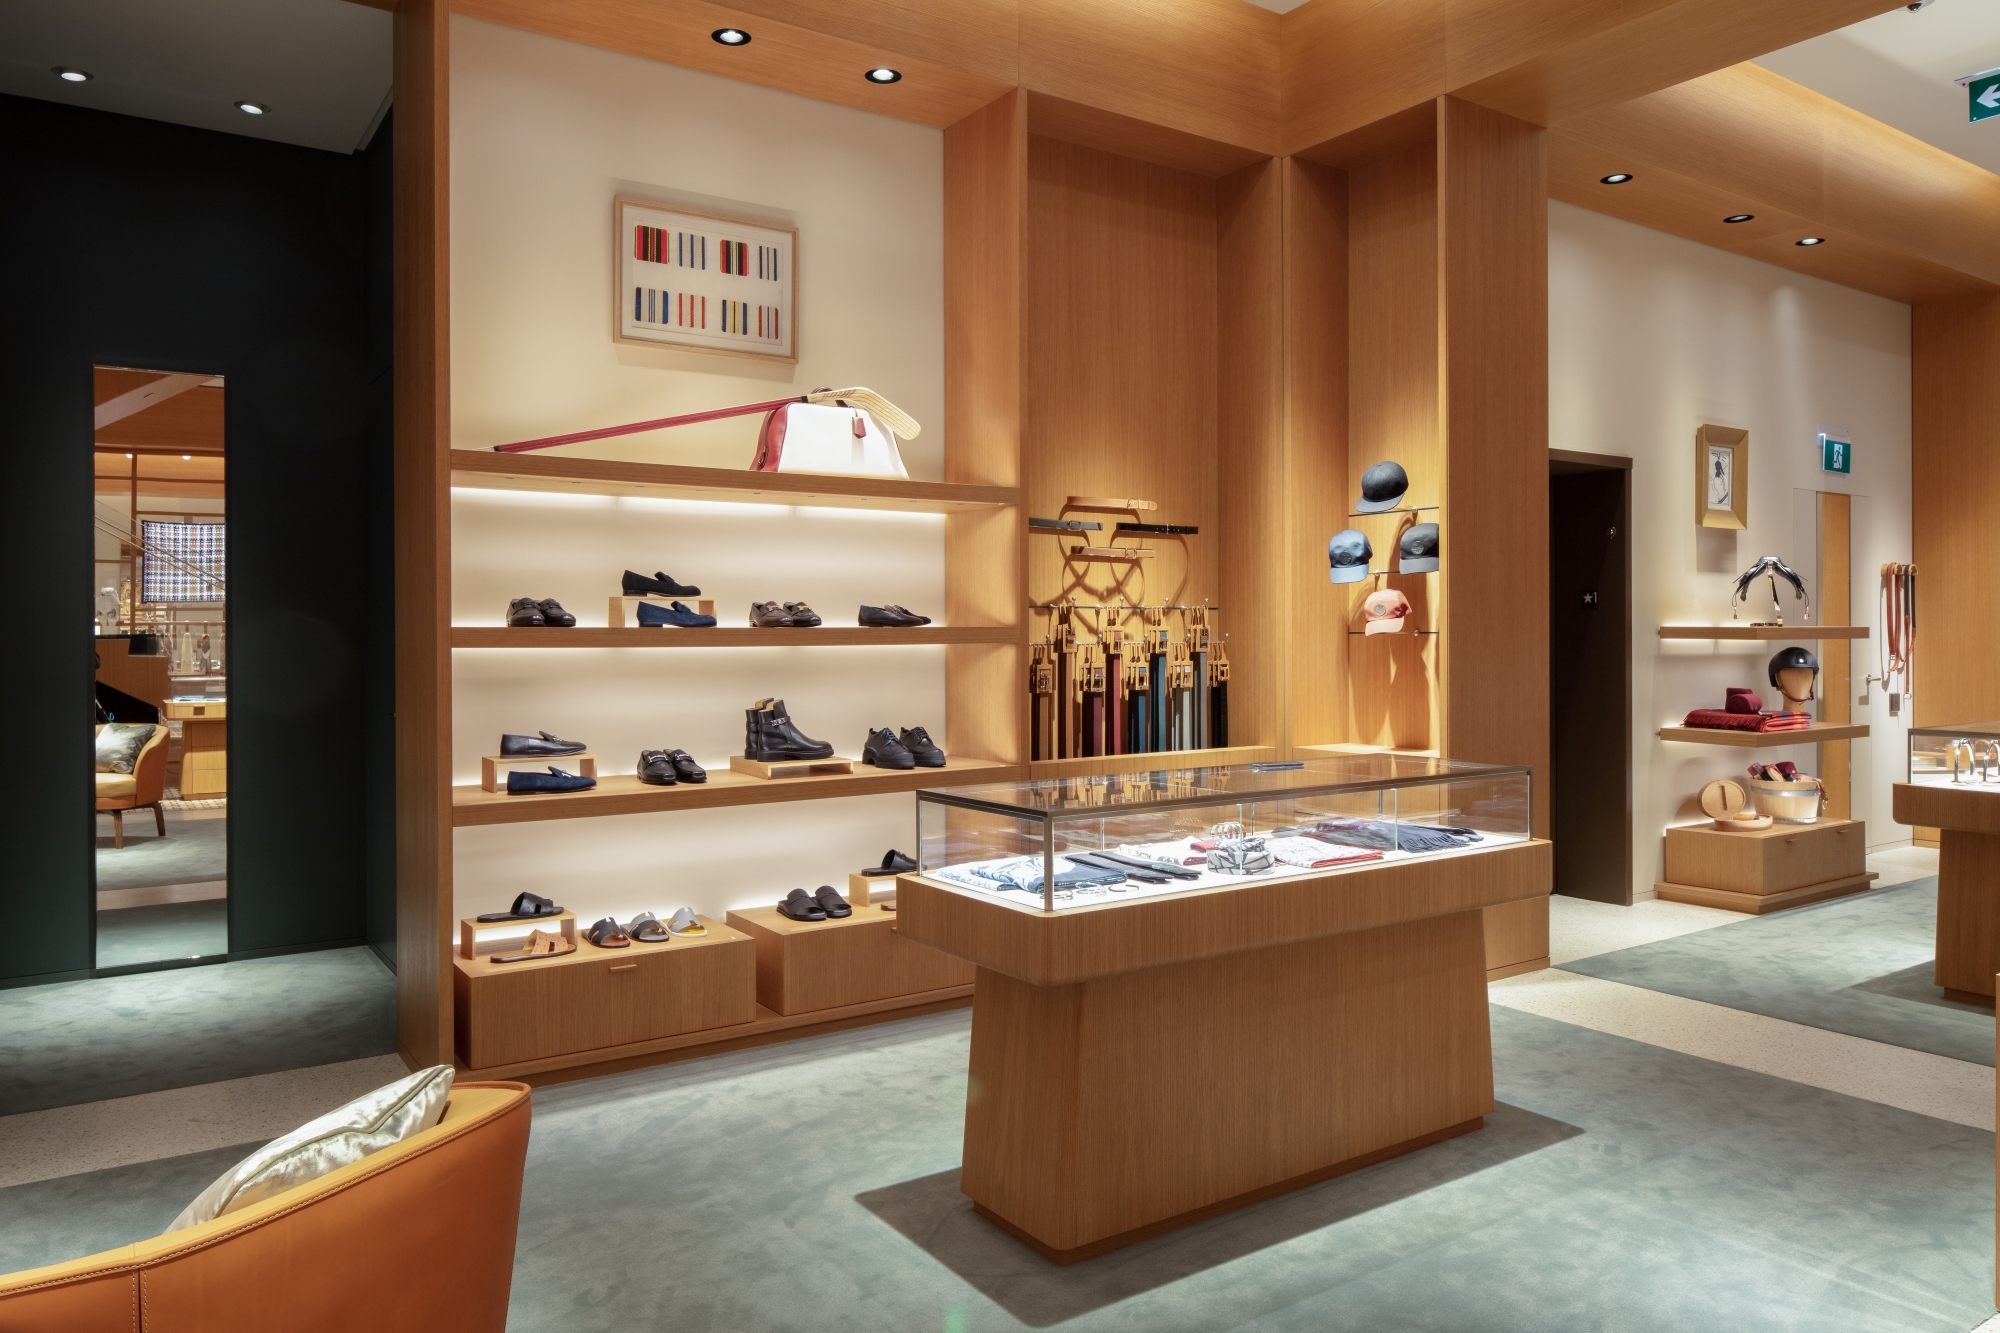 Hermès Opened its Flagship Store and Vancouver Came Out to Celebrate